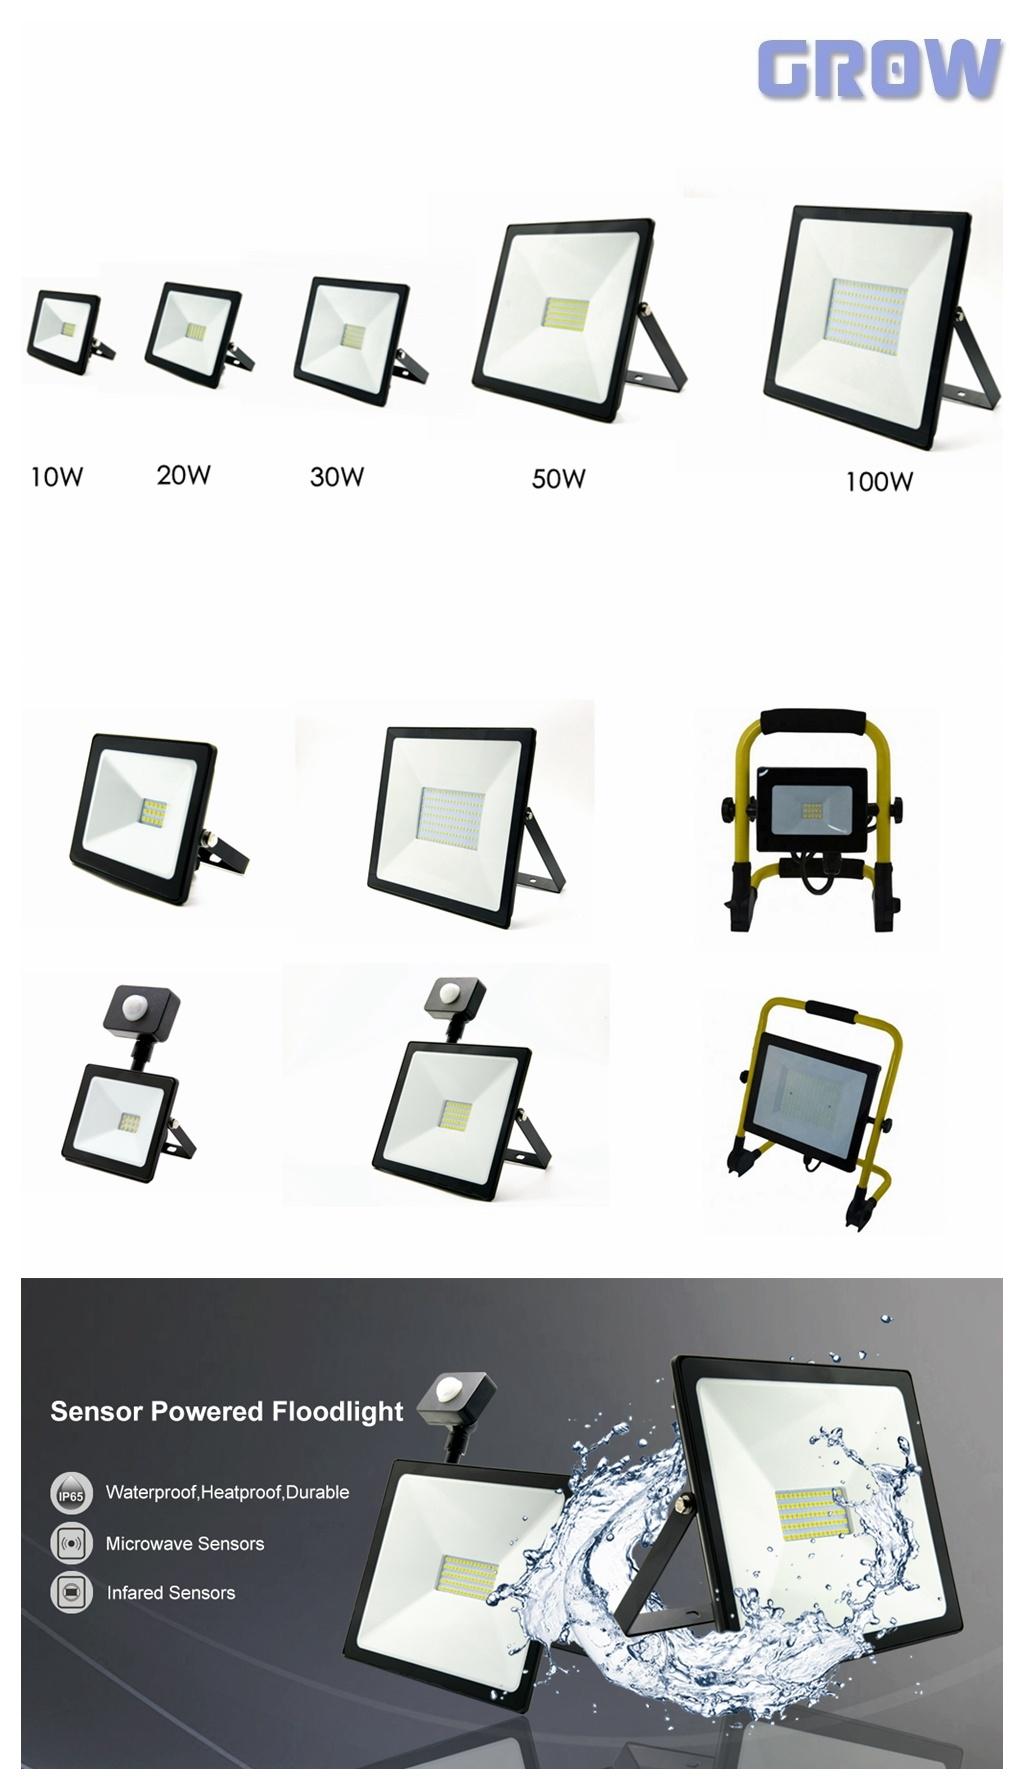 LED Floodlight Distributor of High Power LED Flood Light 400W with CE Approved IP65 2years Warranty